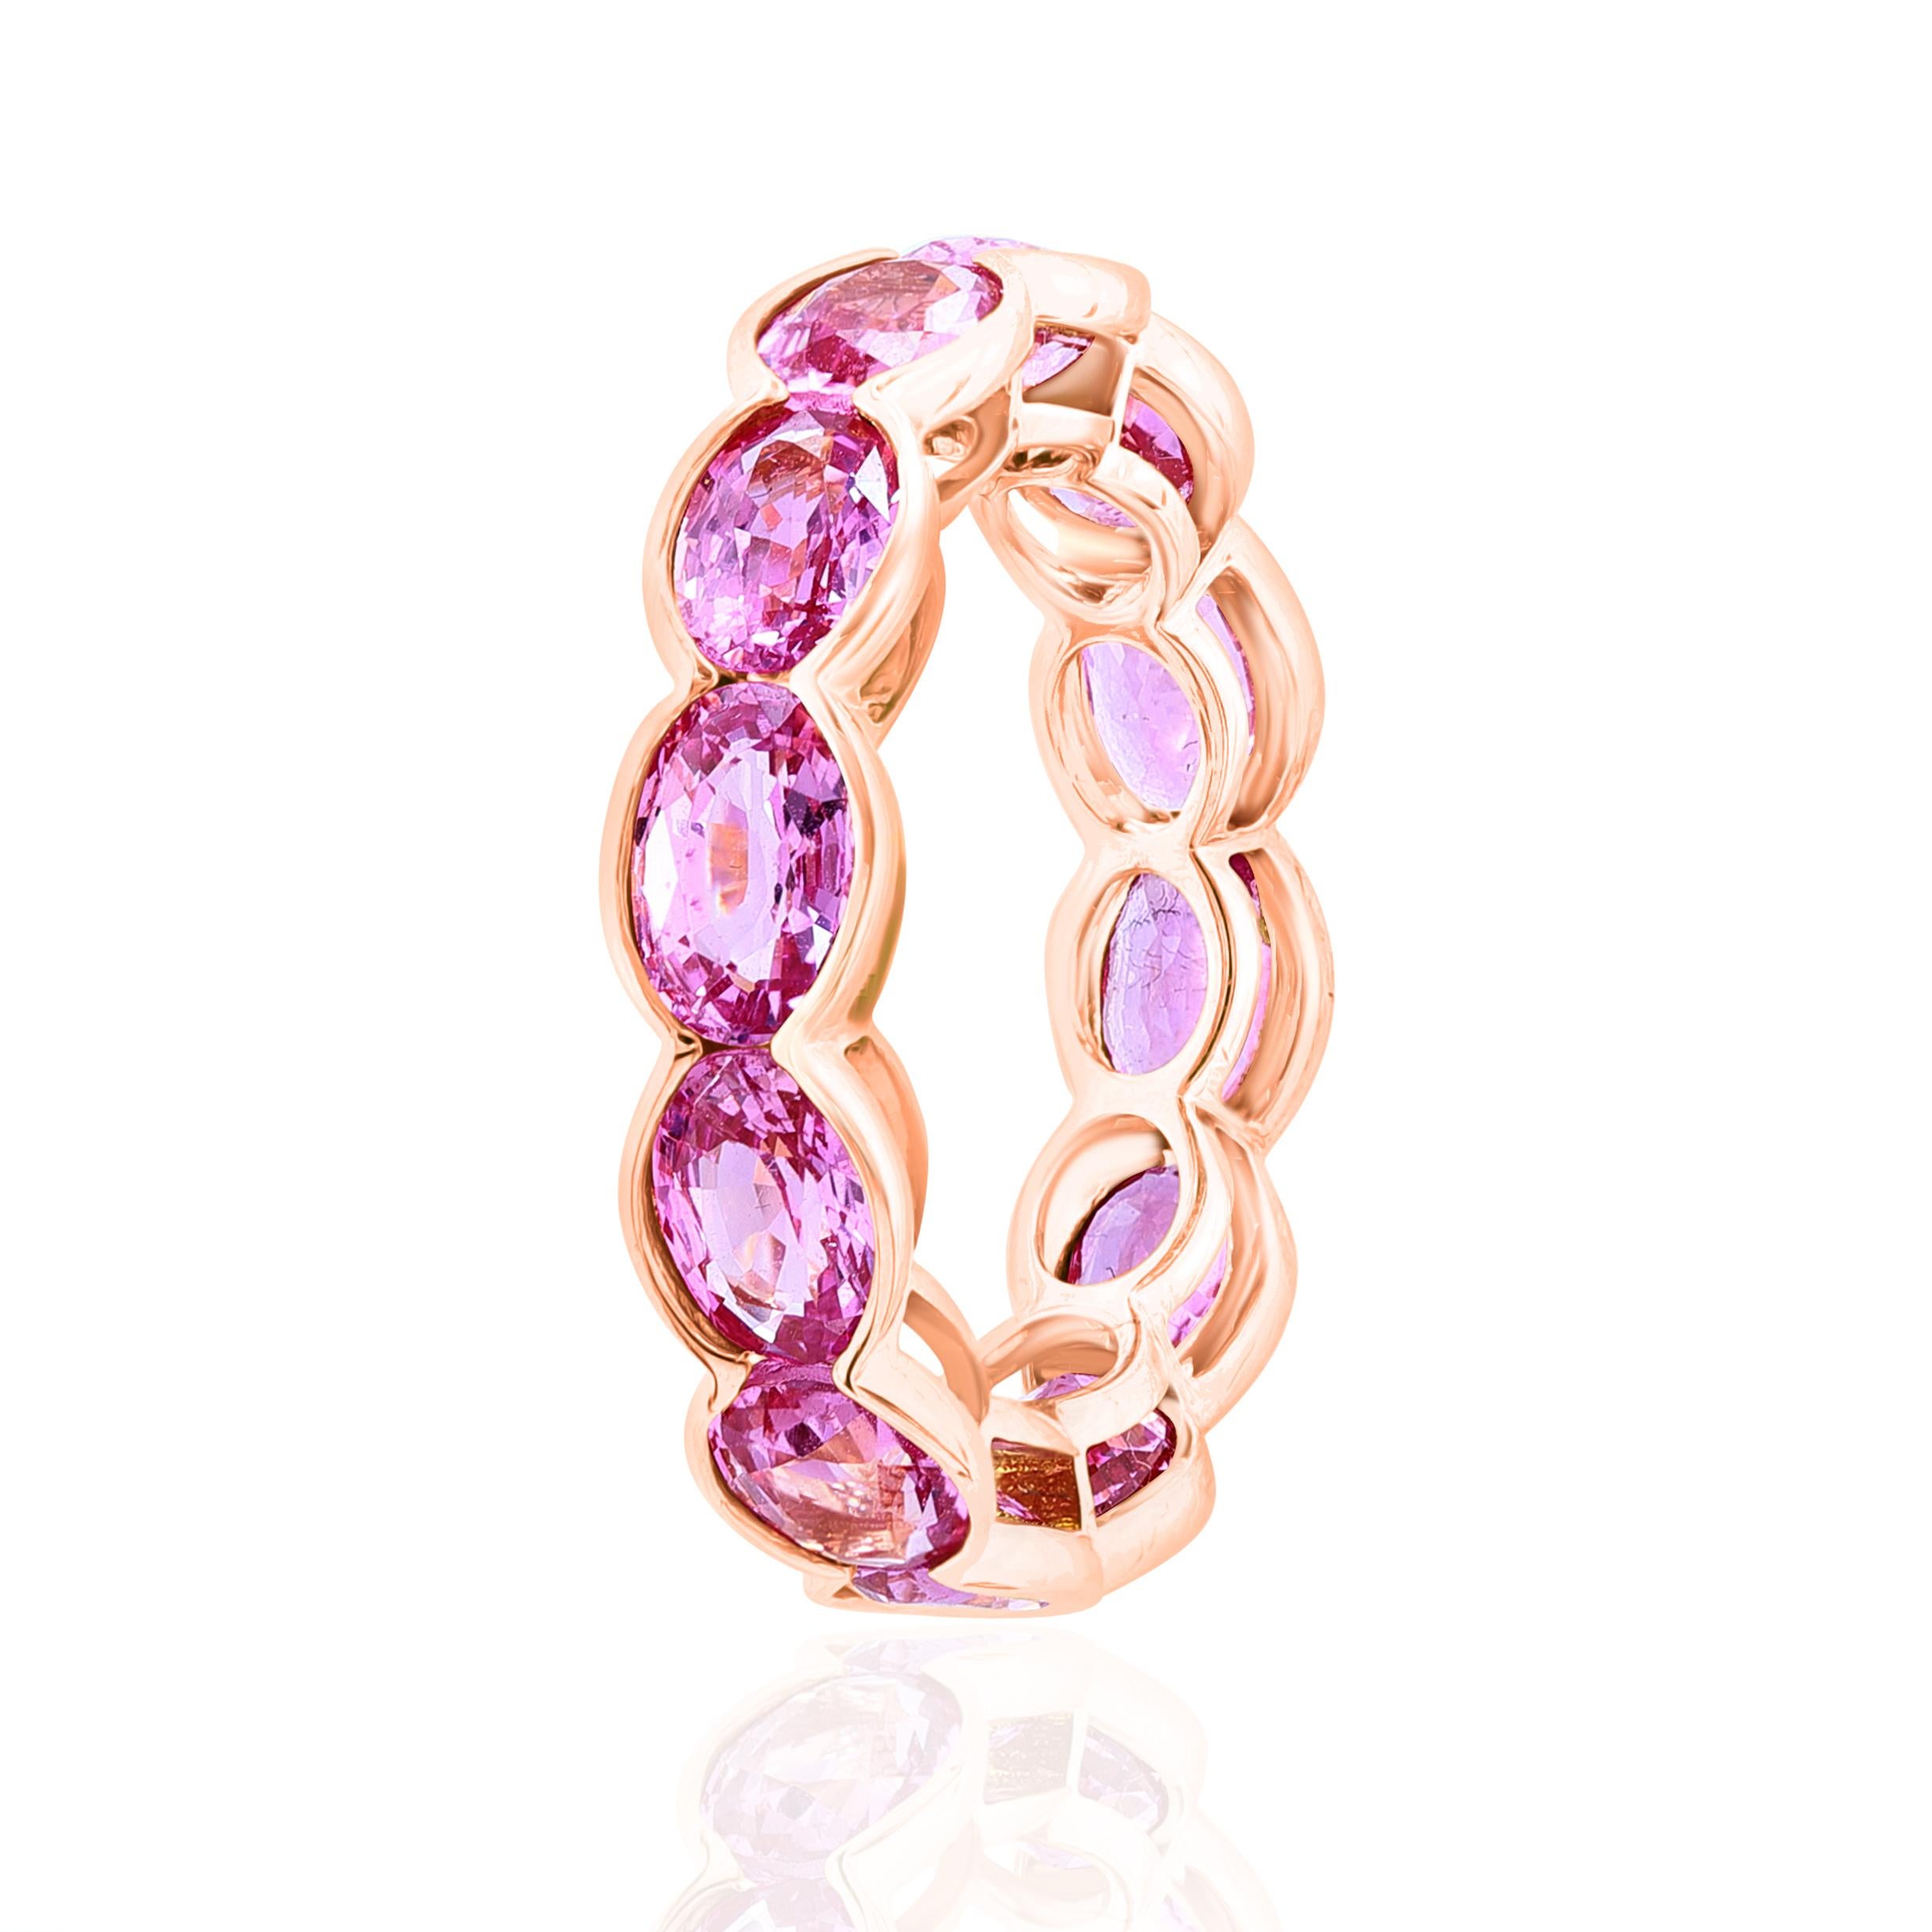 Beautiful and Forward Eternity Band.
Ring features 12 perfectly matched Pink Sapphires weighing 6.86 Carats.
Set in 18 Karat Rose Gold.
Size 6